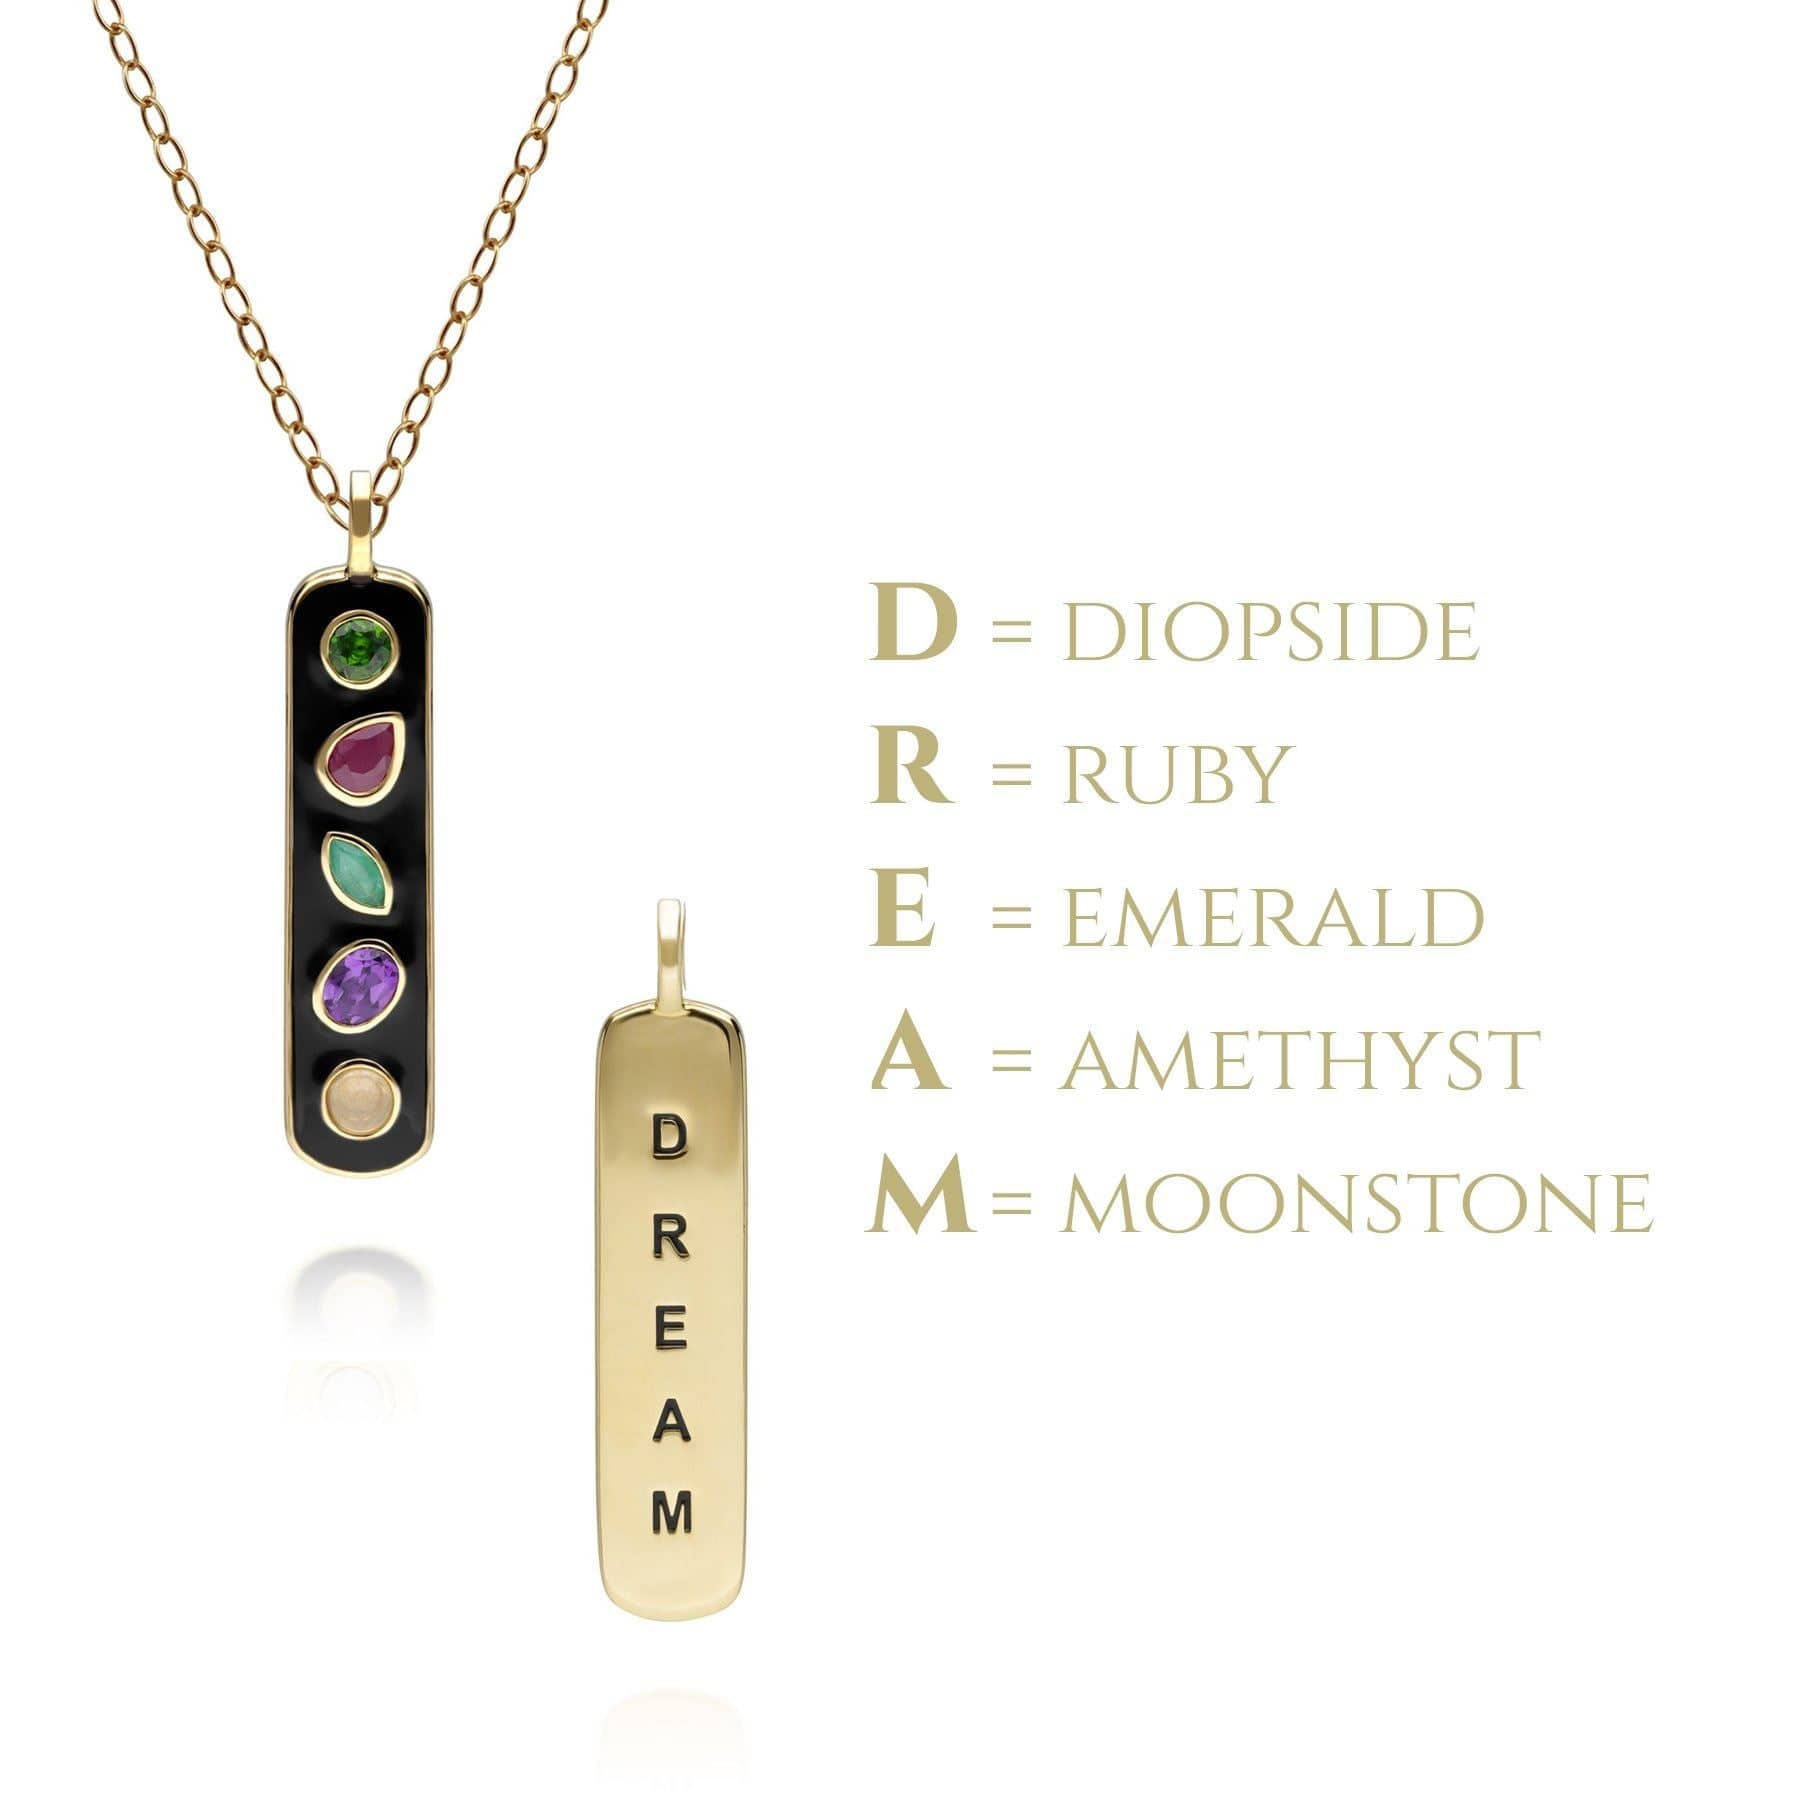 253P312101925 Coded Whispers Black Enamel 'Dream' Acrostic Gemstone Pendant Necklace in Sterling Silver 5